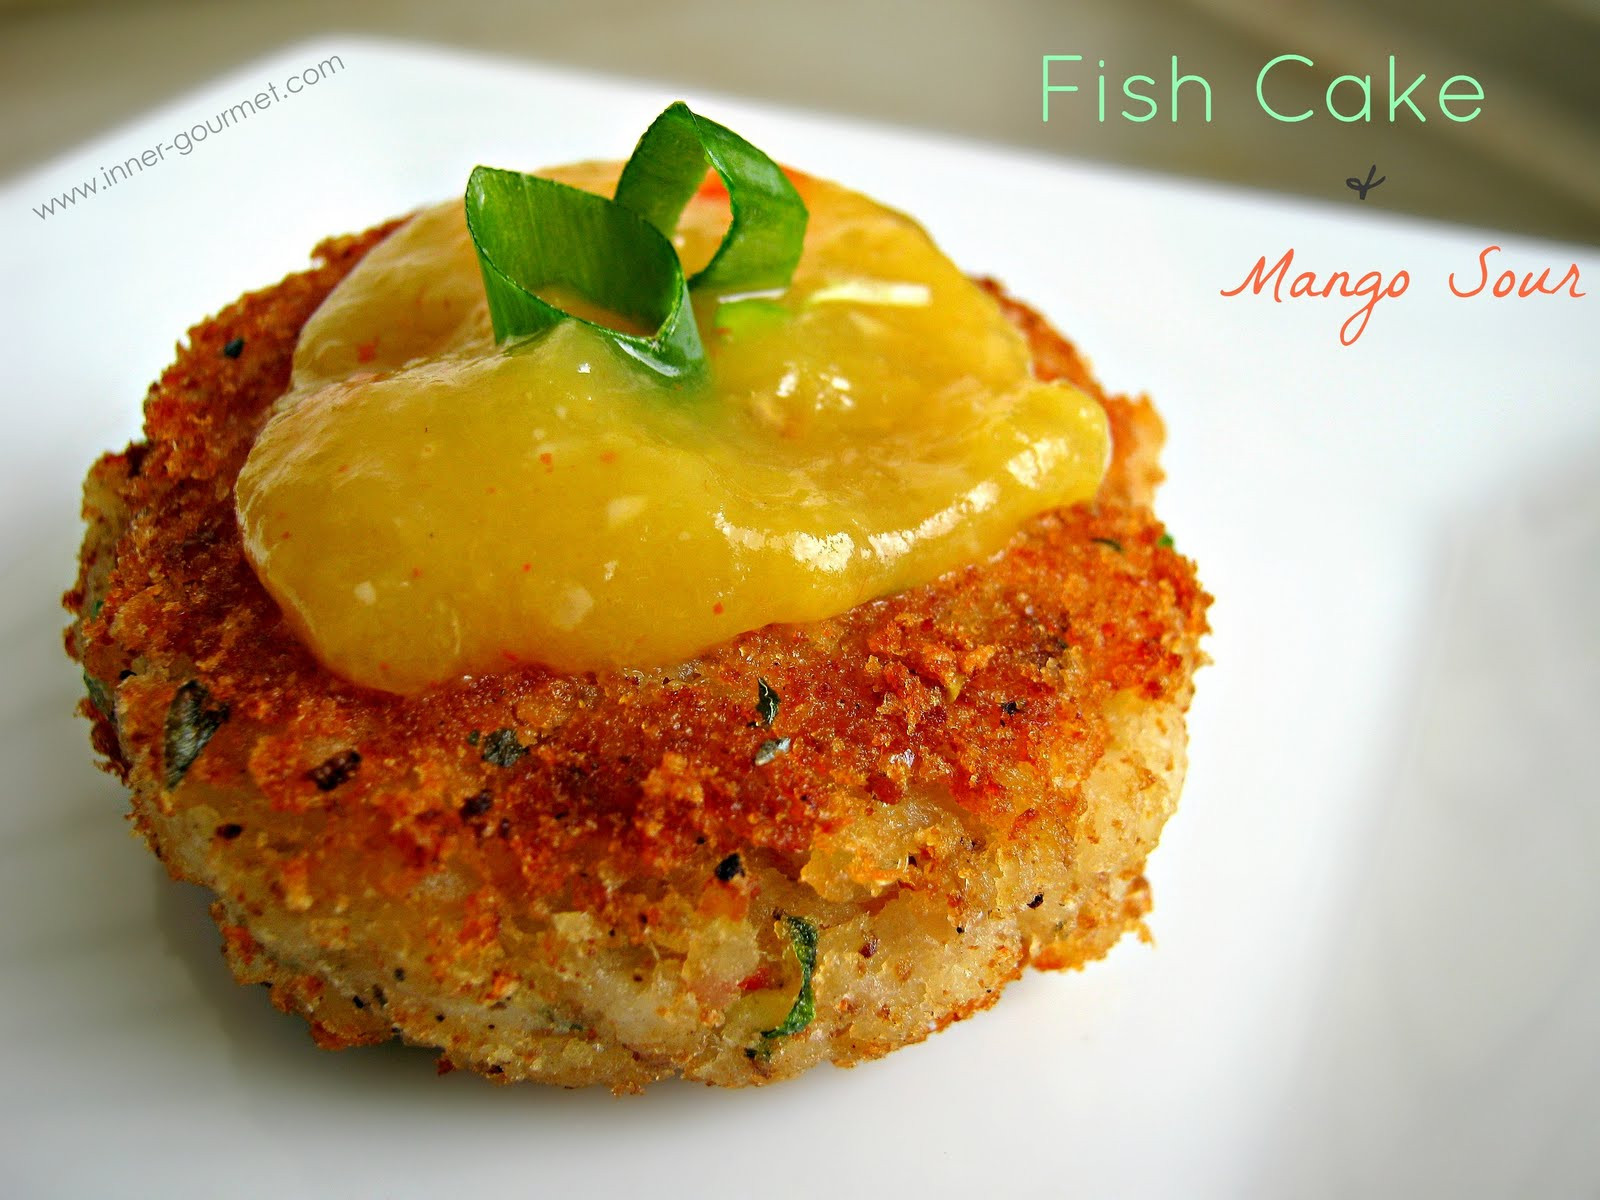 Recipes For Fish Cakes
 Fish Cakes with Mango Sour Alica s Pepperpot